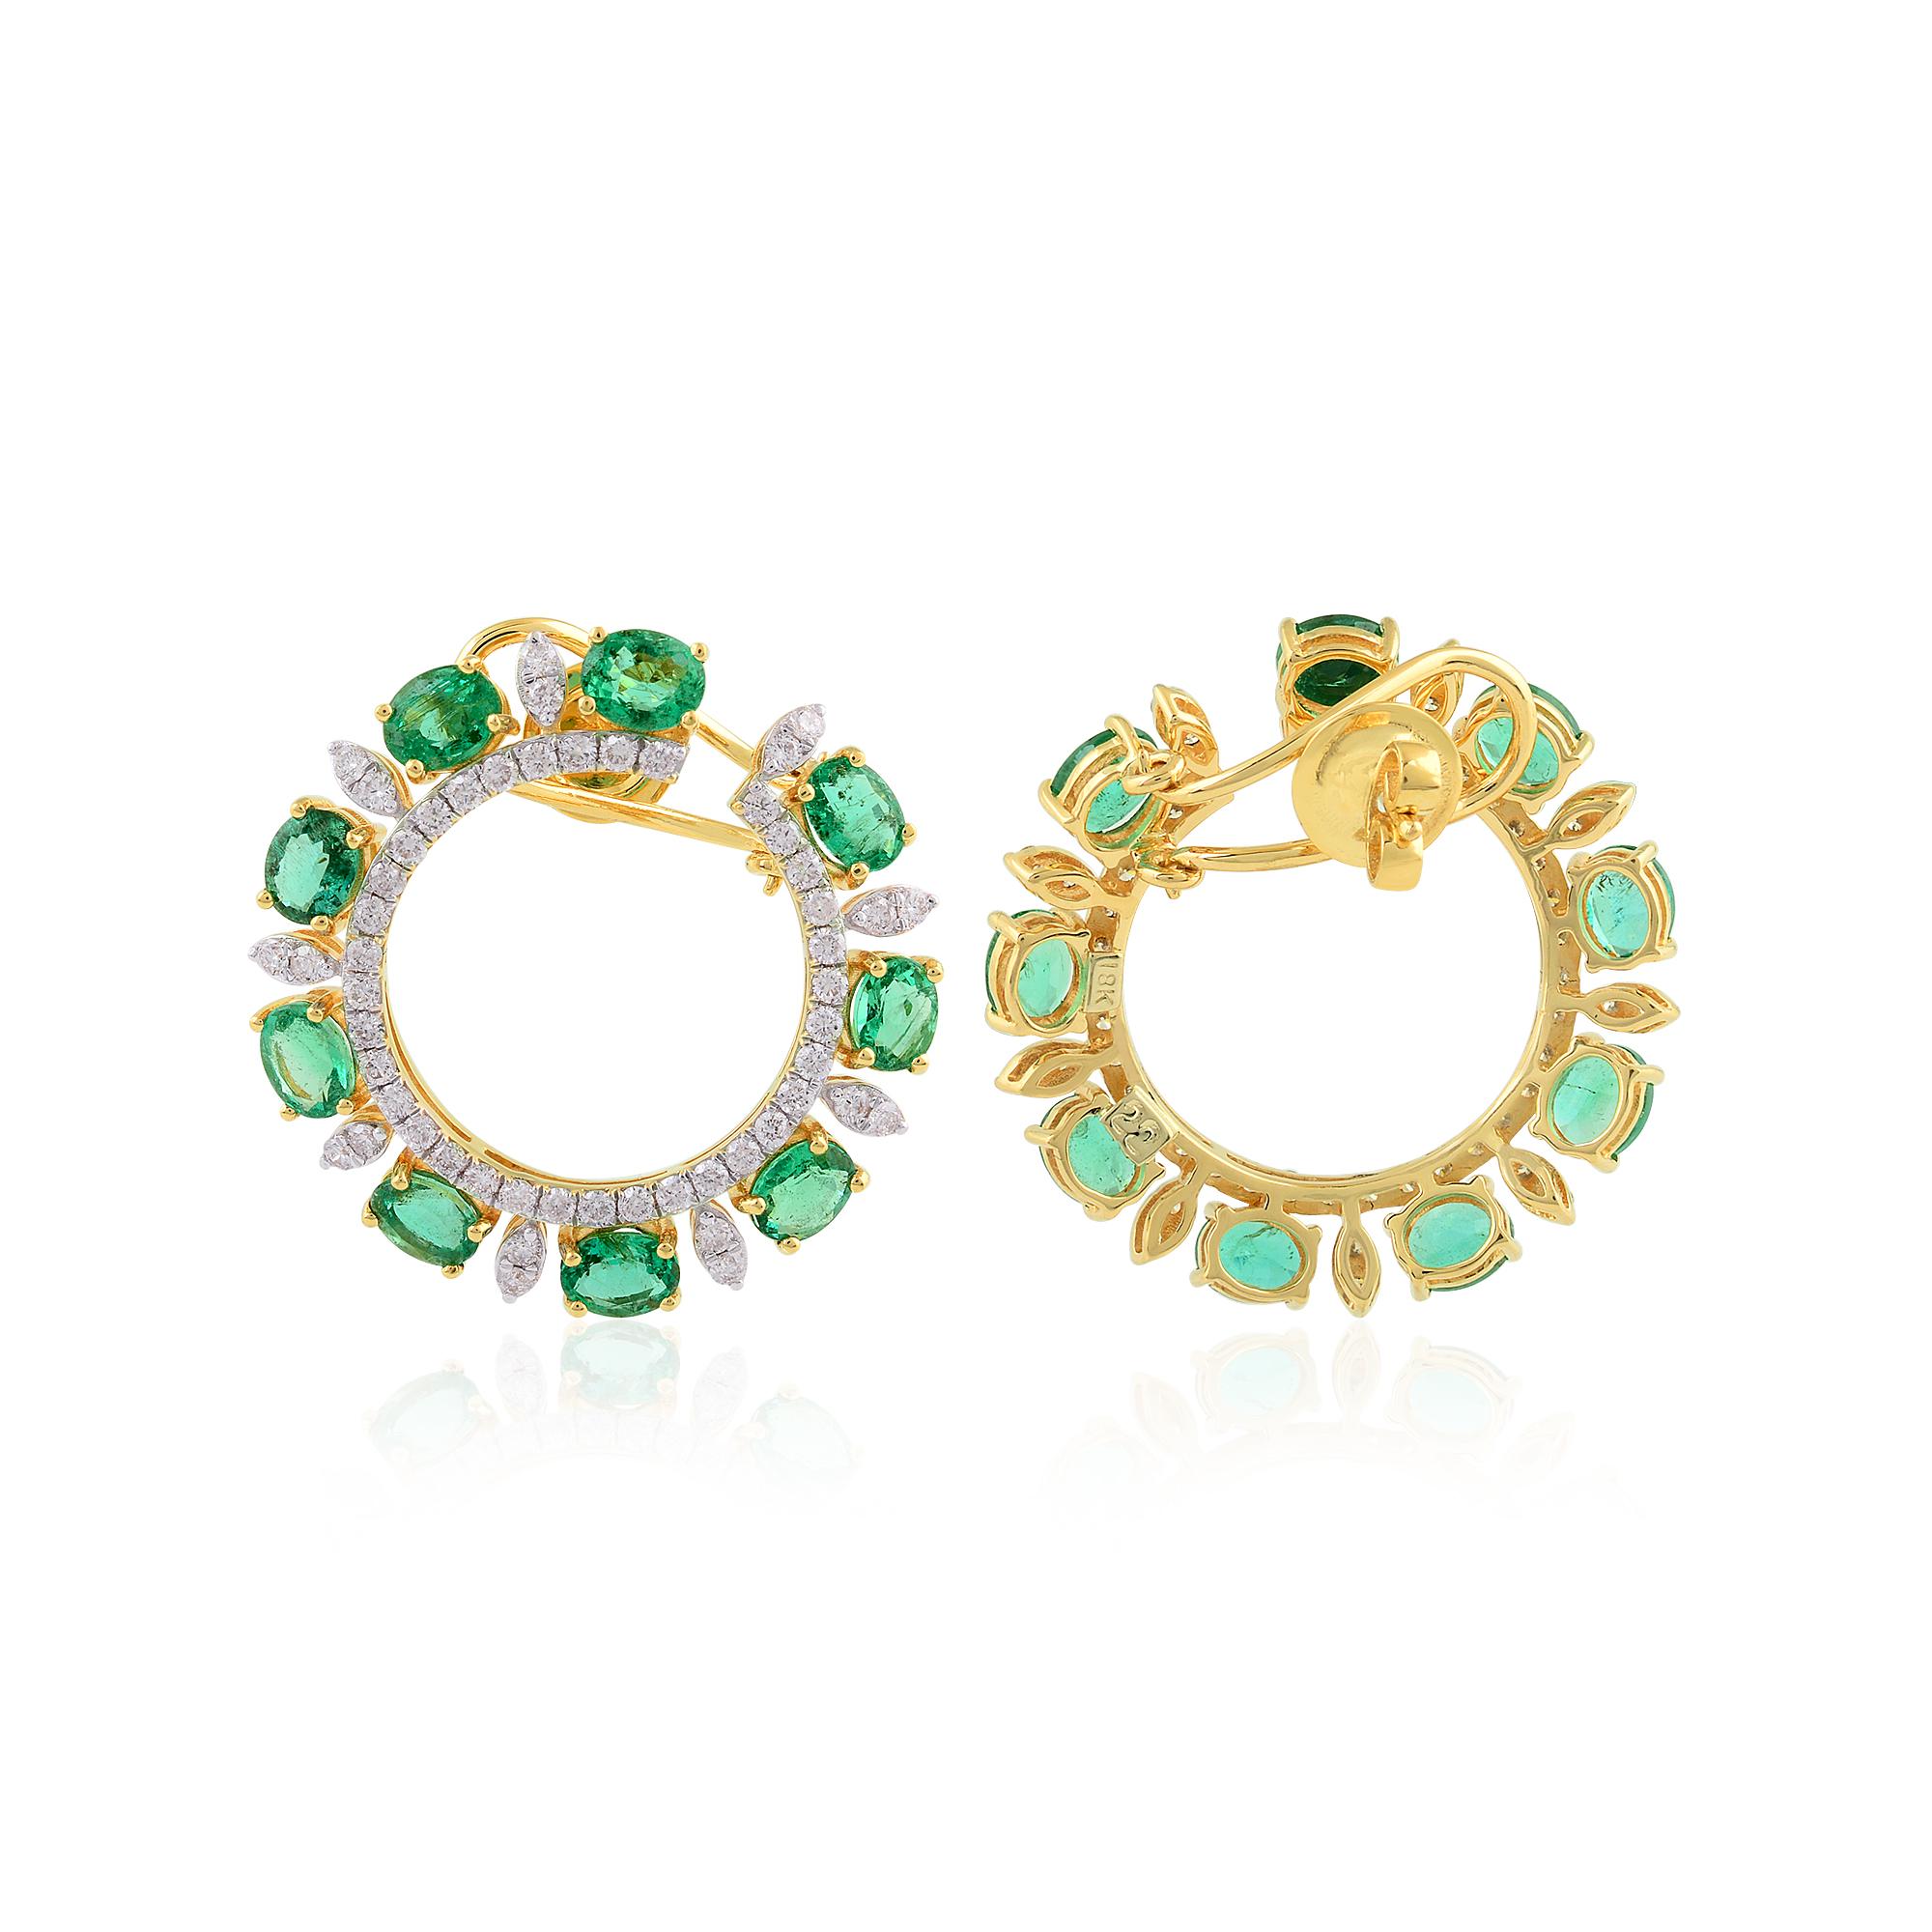 Set in a lustrous 18 karat yellow gold setting, these earrings exude luxury and refinement at every glance. The warm tones of the gold perfectly complement the vivid green of the emeralds, creating a harmonious contrast that enhances the beauty of